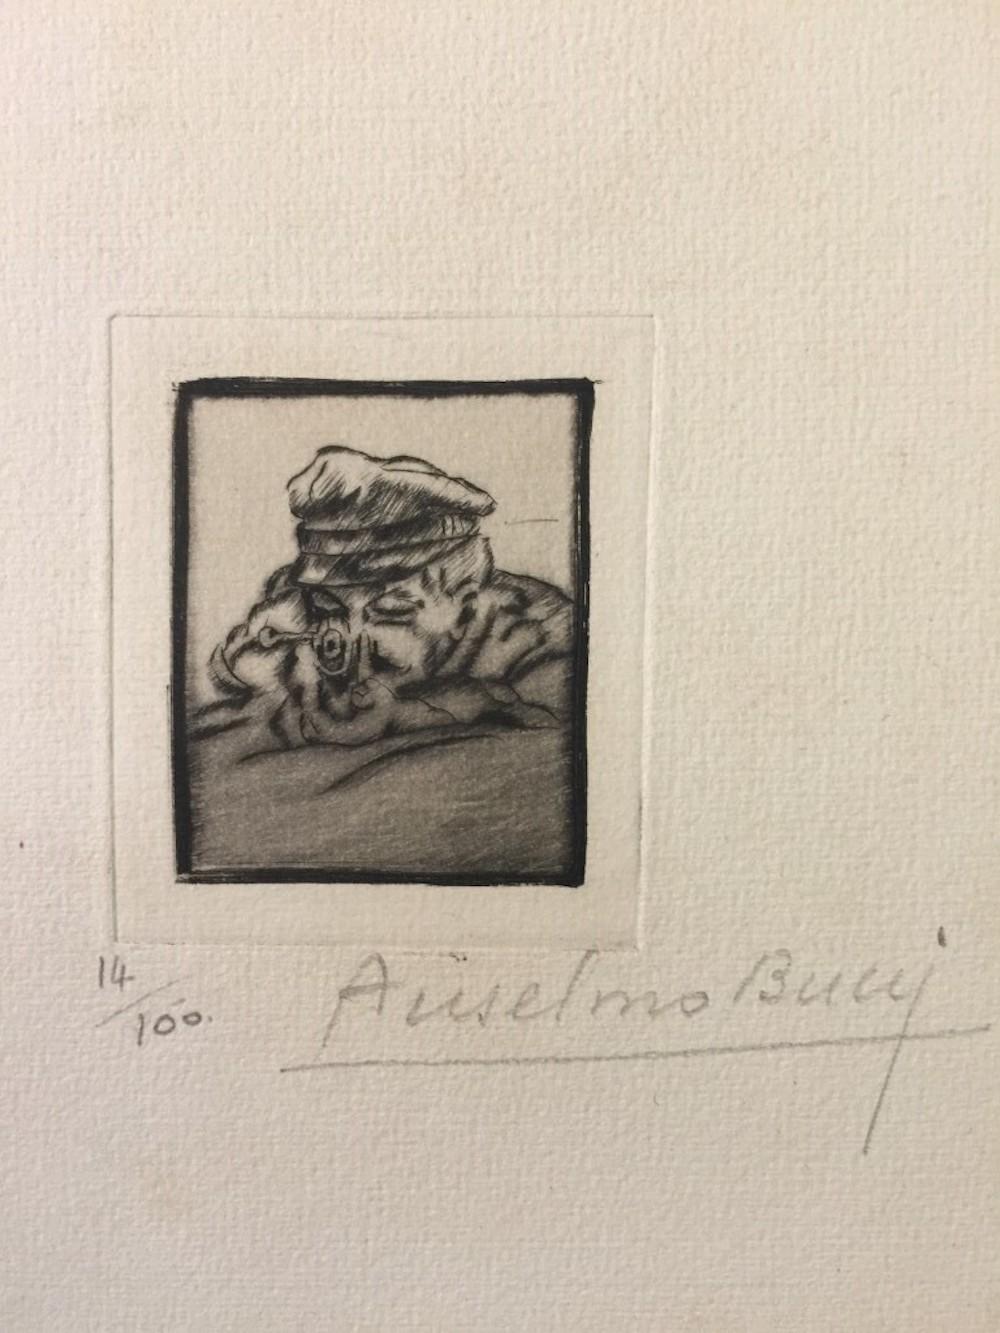 Image dimensions: 6 x 5  cm.

Hand signed. Edition of 100 prints on Hollande paper. From the collection: “Croquis du Front Italien” , published in Paris by D'Alignan editions. Anselmo Bucci was an Italian painter and printmaker.

He took part in the